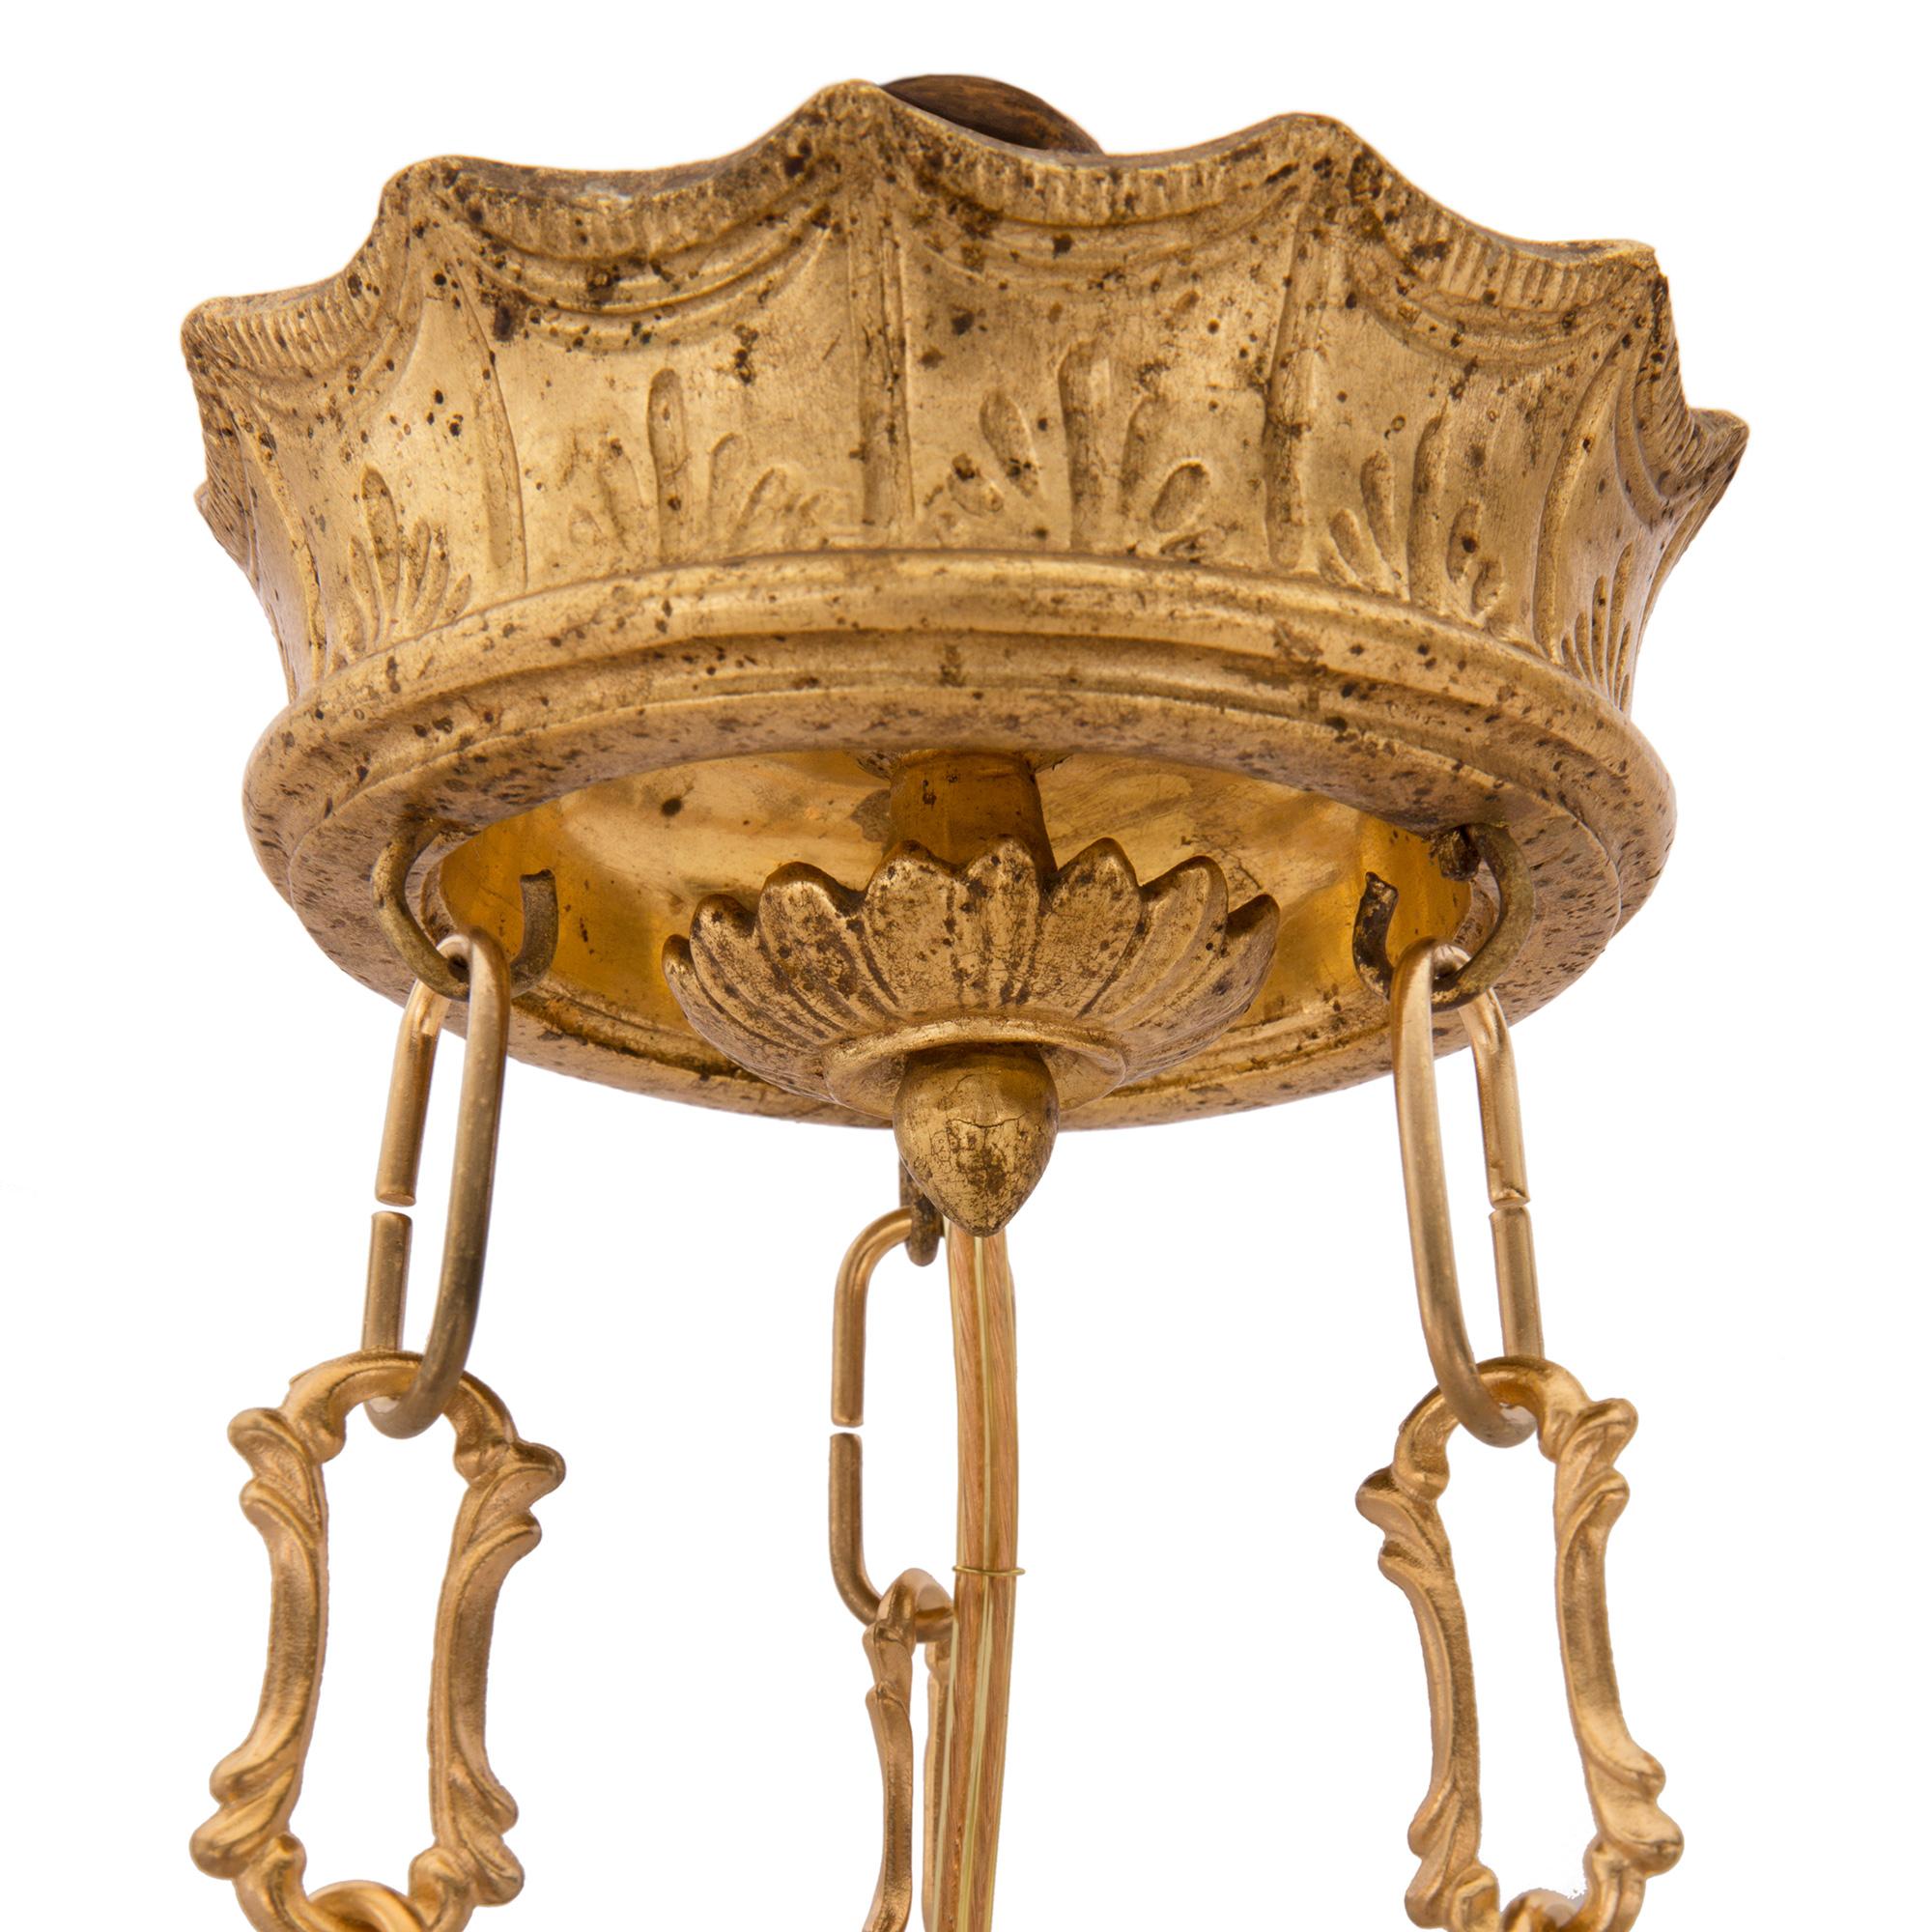 Italian 19th Century Neoclassical Style Giltwood and Ormolu Chandelier In Good Condition For Sale In West Palm Beach, FL